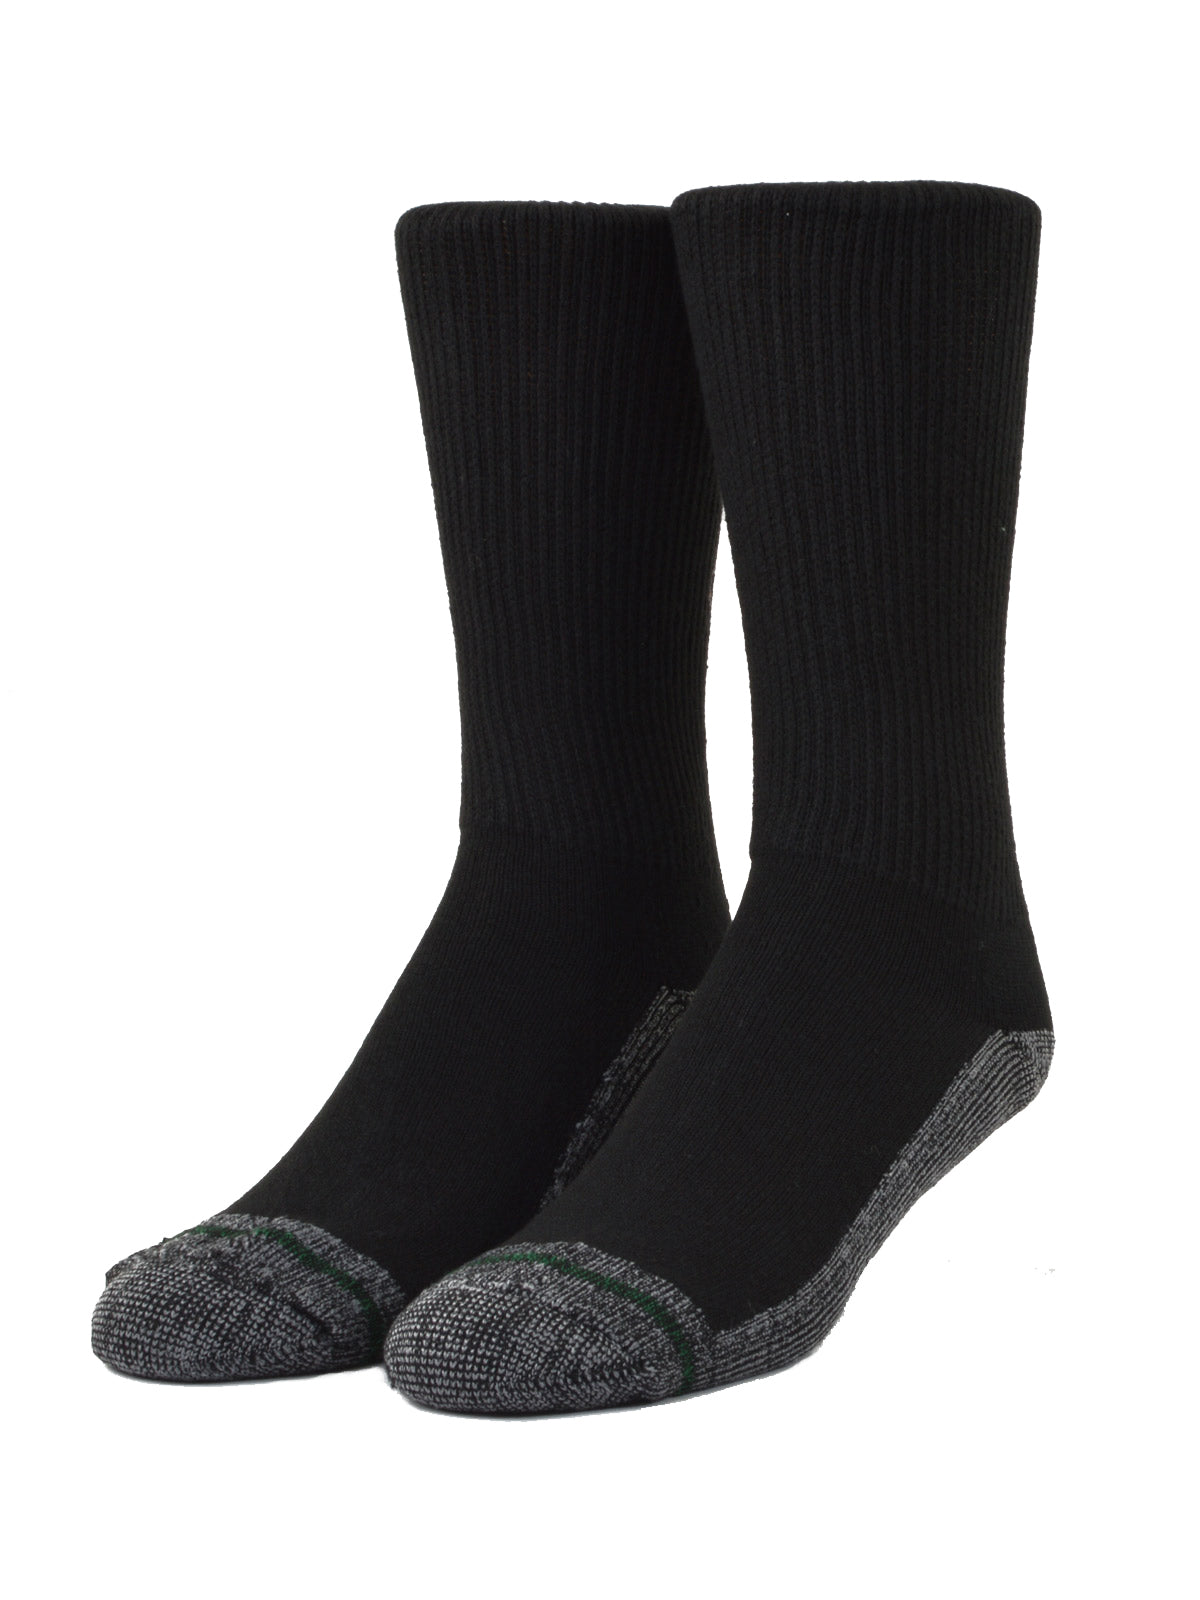 Loose Fit Stays Up Crew Athletic Socks in Black - Small (Size 5 - 8) - 771